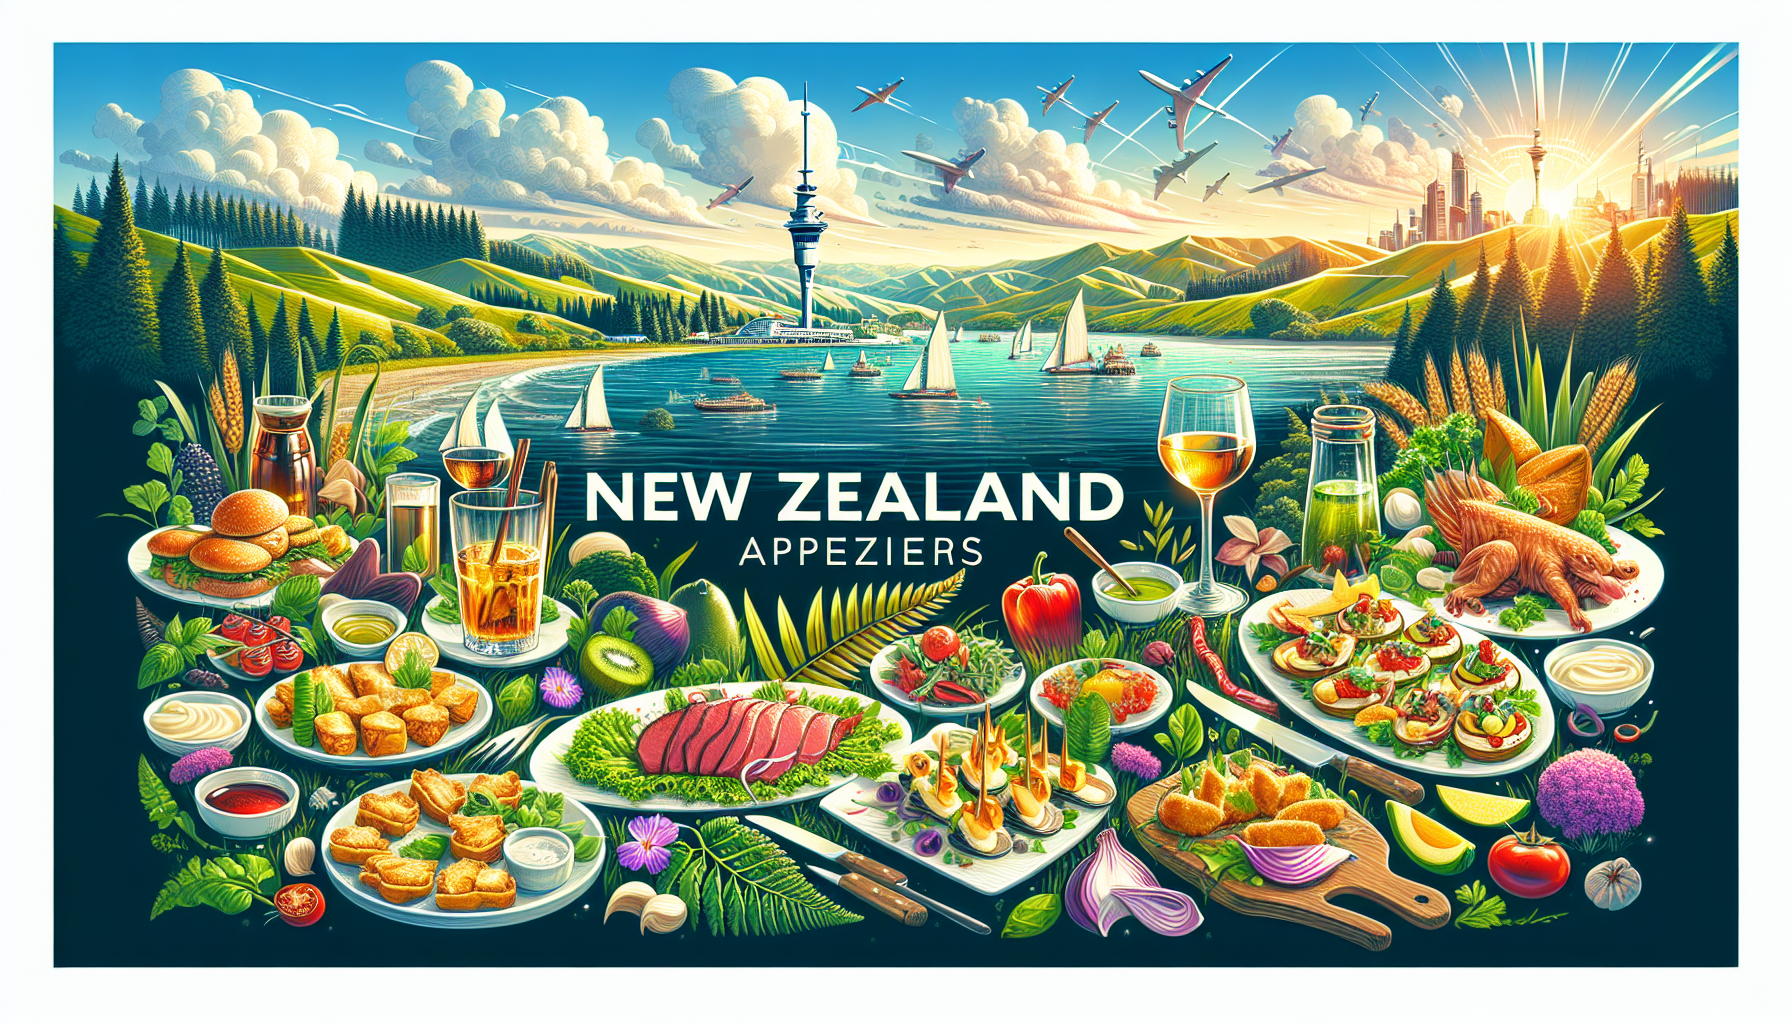 Share Your New Zealand-inspired Appetizer For A Unique Culinary Experience.